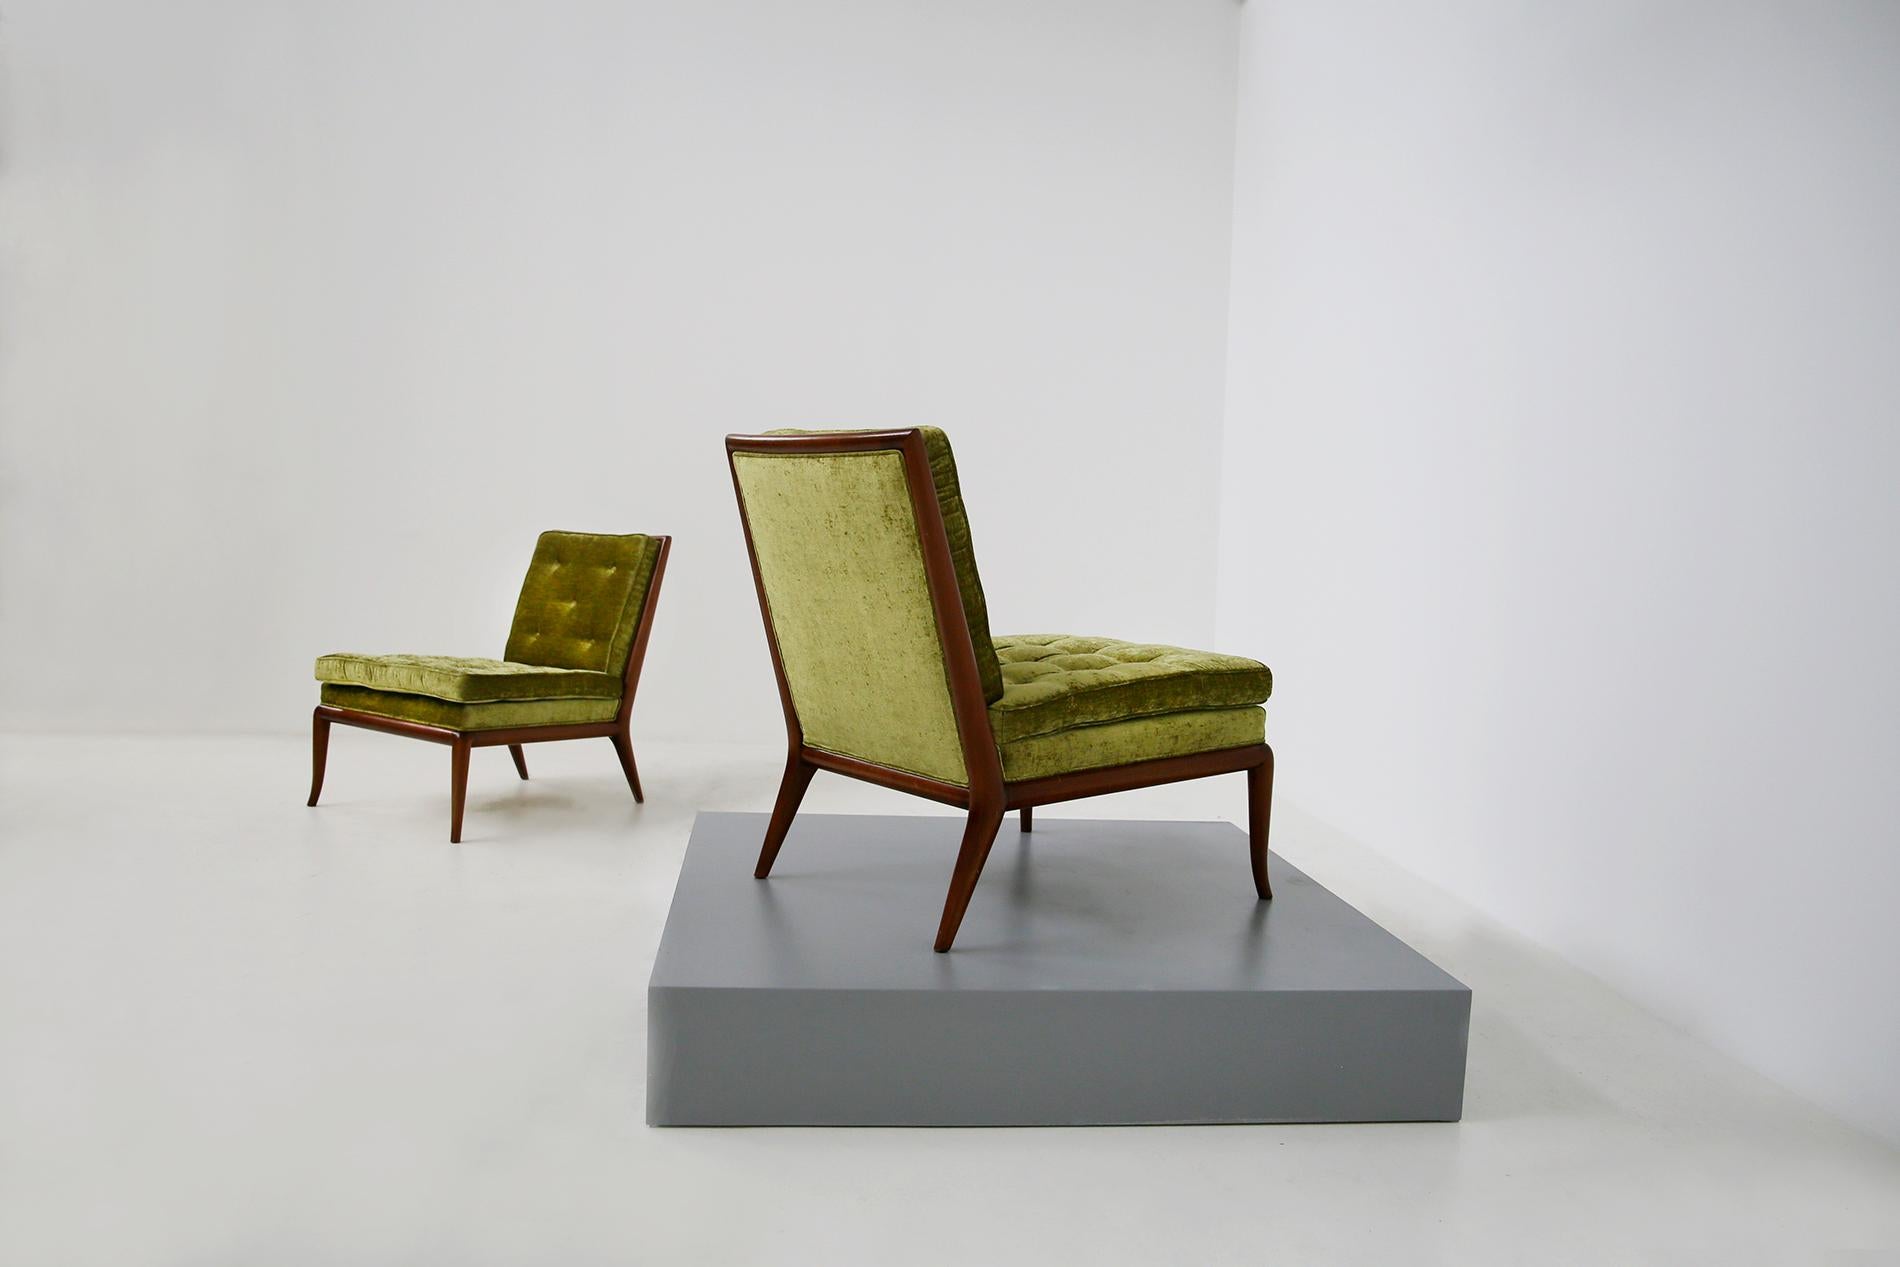 Elegant pair of American armchairs by the great designer T. H. Robsjohn-Gibbings from 1950. The armchairs were made by the Widdicomb Furniture Company. The pair of armchairs has been restored in an elegant green Italian velvet. The seat and its